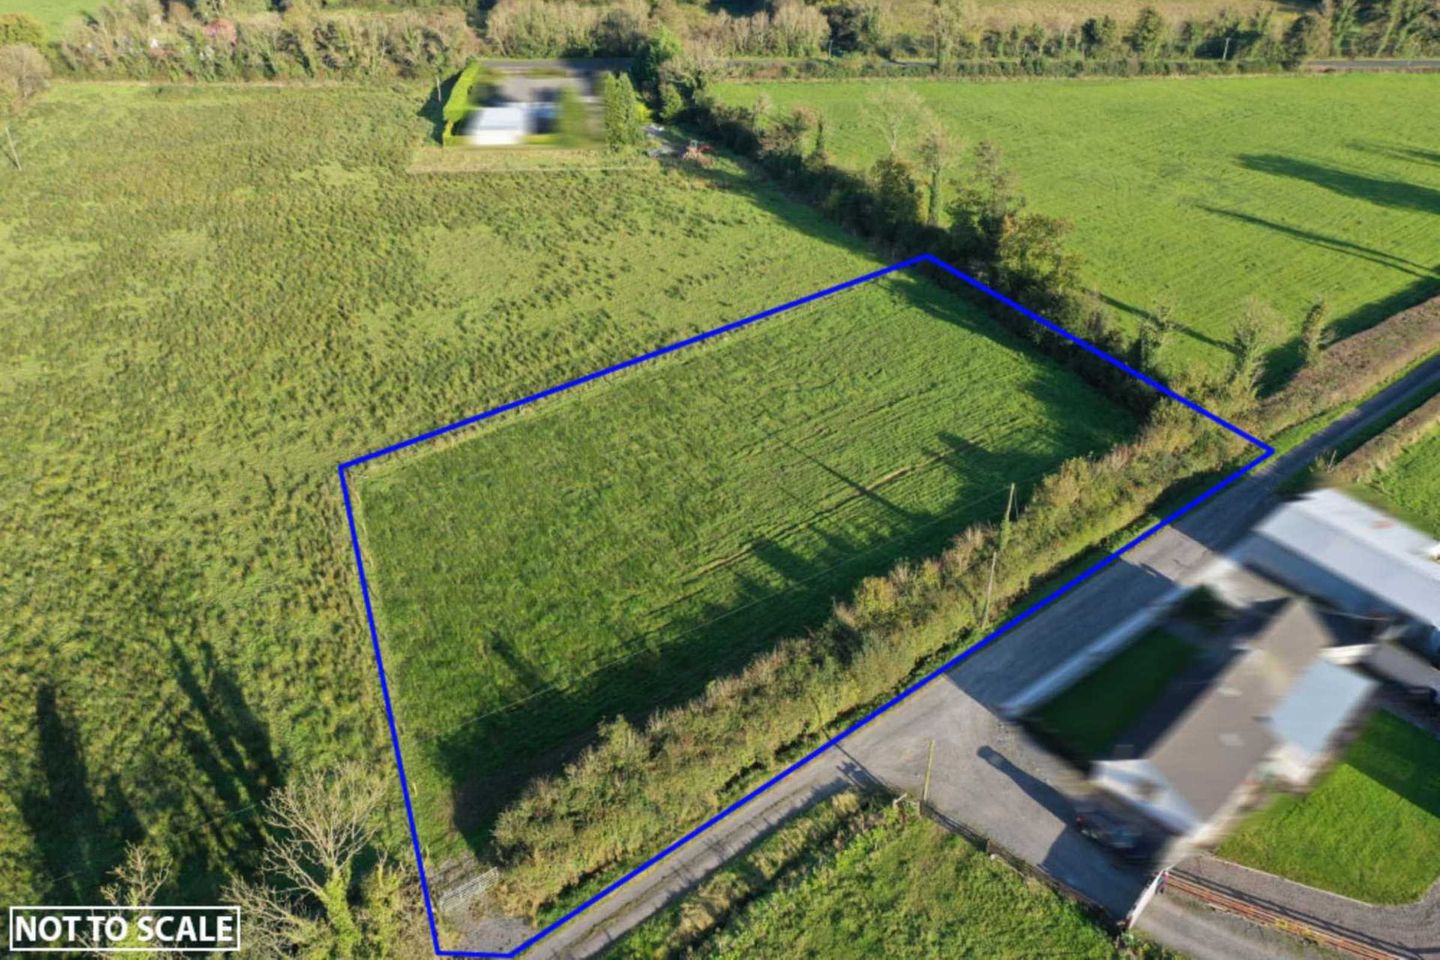 c. 1 Acre (2 Sites) at Cartron, Kilrooskey, Co. Roscommon